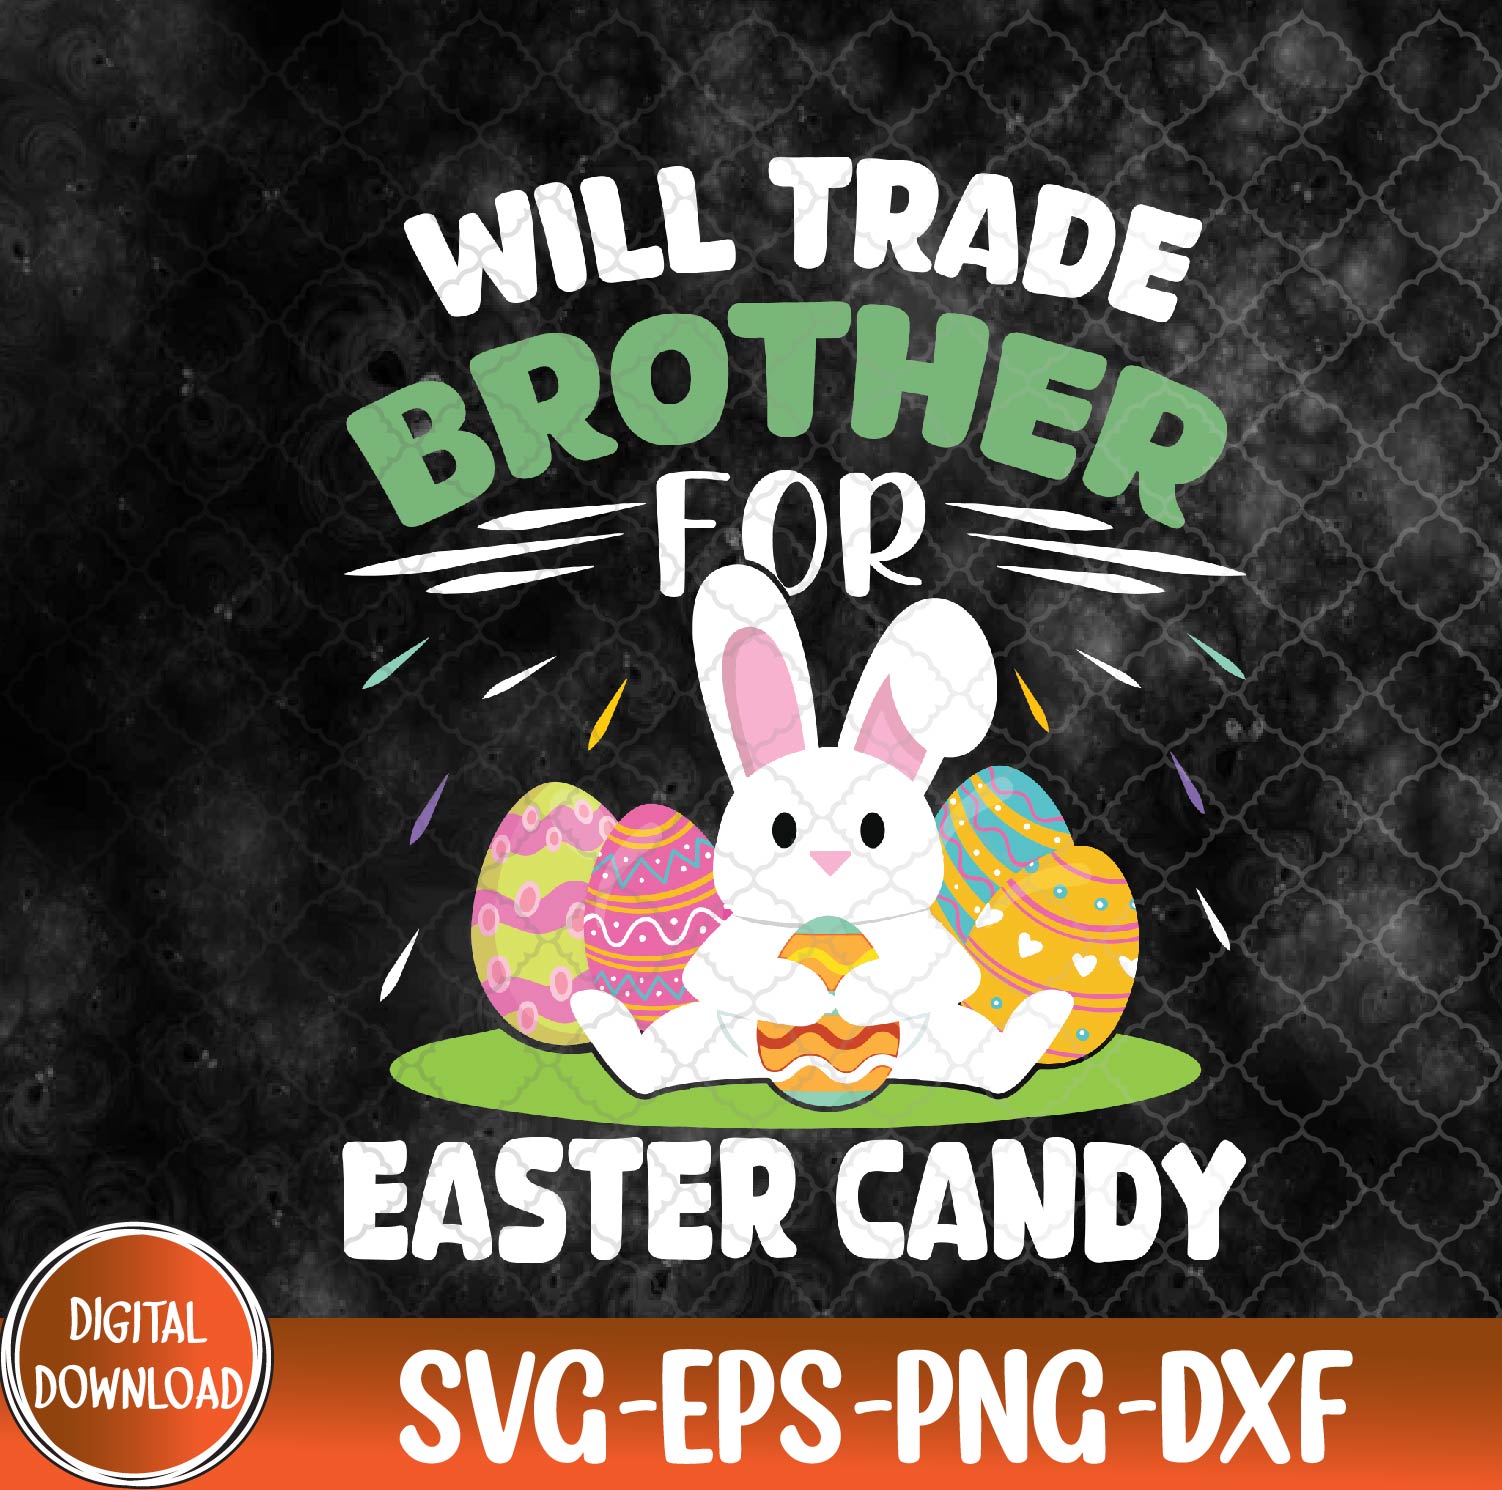 WTMNEW9file 09 20 Funny Will Trade Brother for Easter Candy Bunny Svg, Eps, Png, Dxf